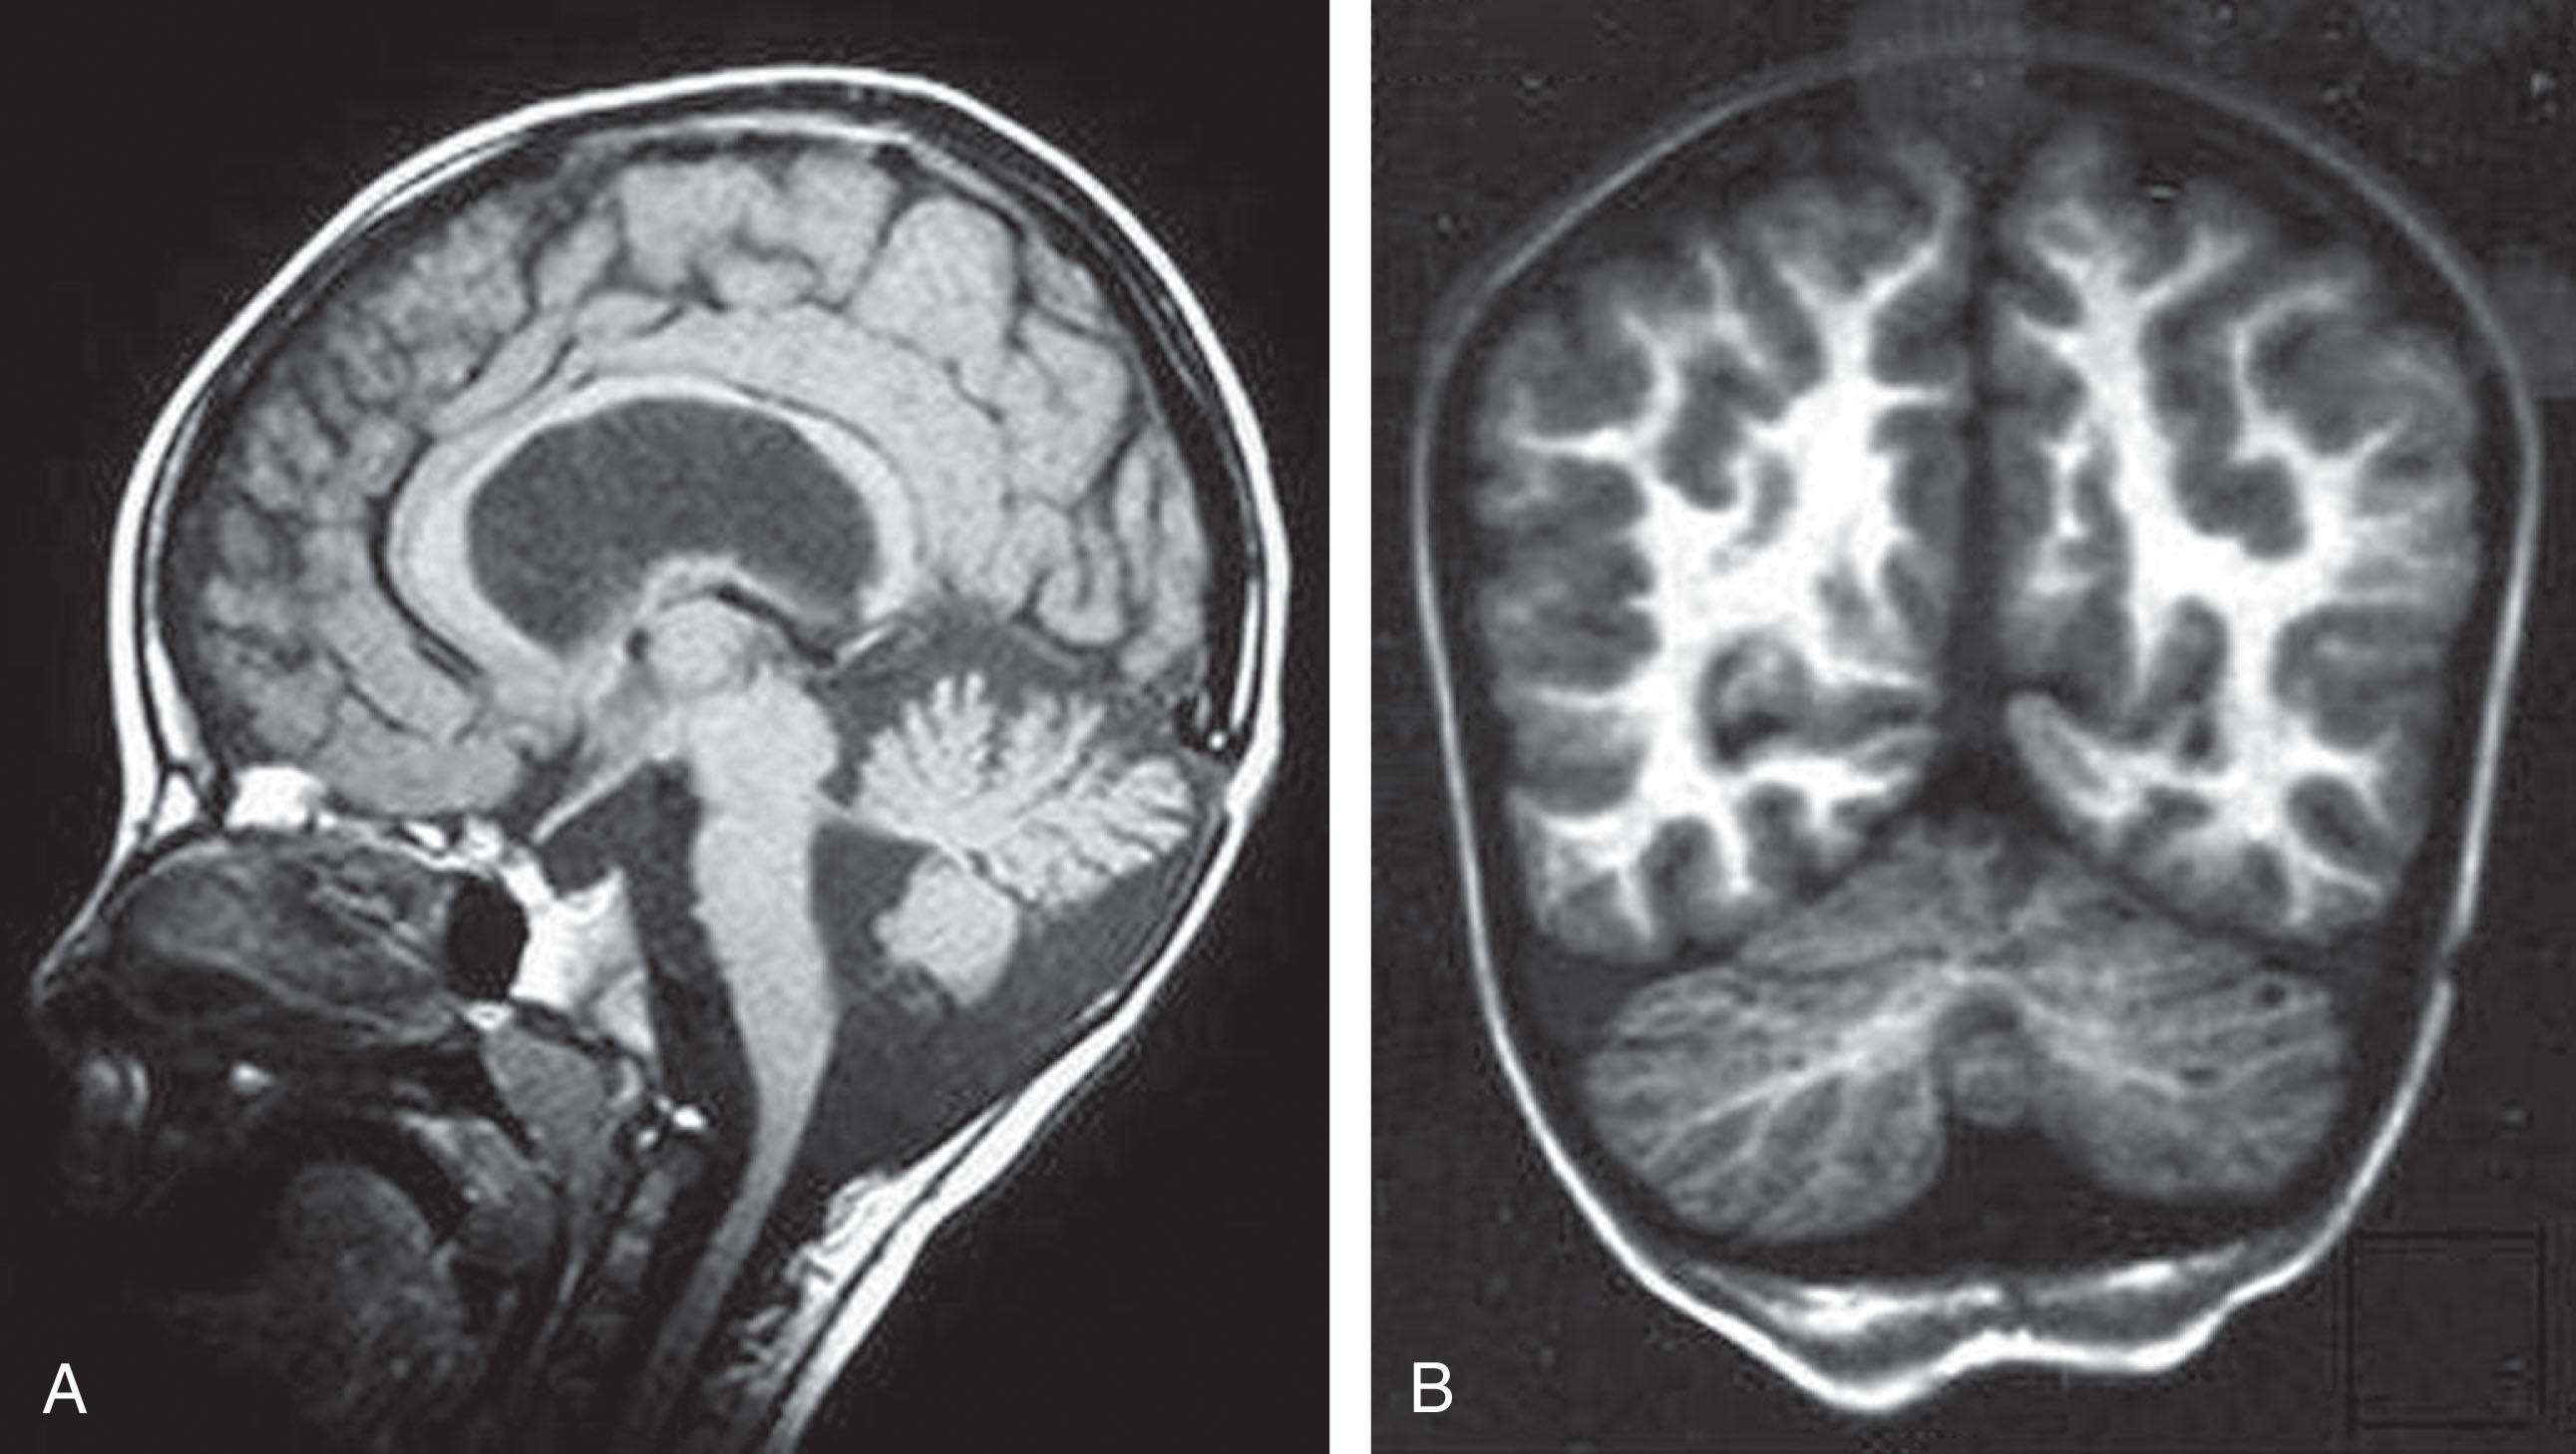 Fig. 37.9, CMD and cerebellar abnormalities with POMT2 mutations . (A) Enlarged cisterna magna and mild cerebellar vermis hypoplasia in a 16-month-old child with POMT2 mutations (sagittal T1-weighted brain MR image). (B) Cerebellar cysts in a 7-year-old with POMT2 mutations (coronal T1-weighted MR image).